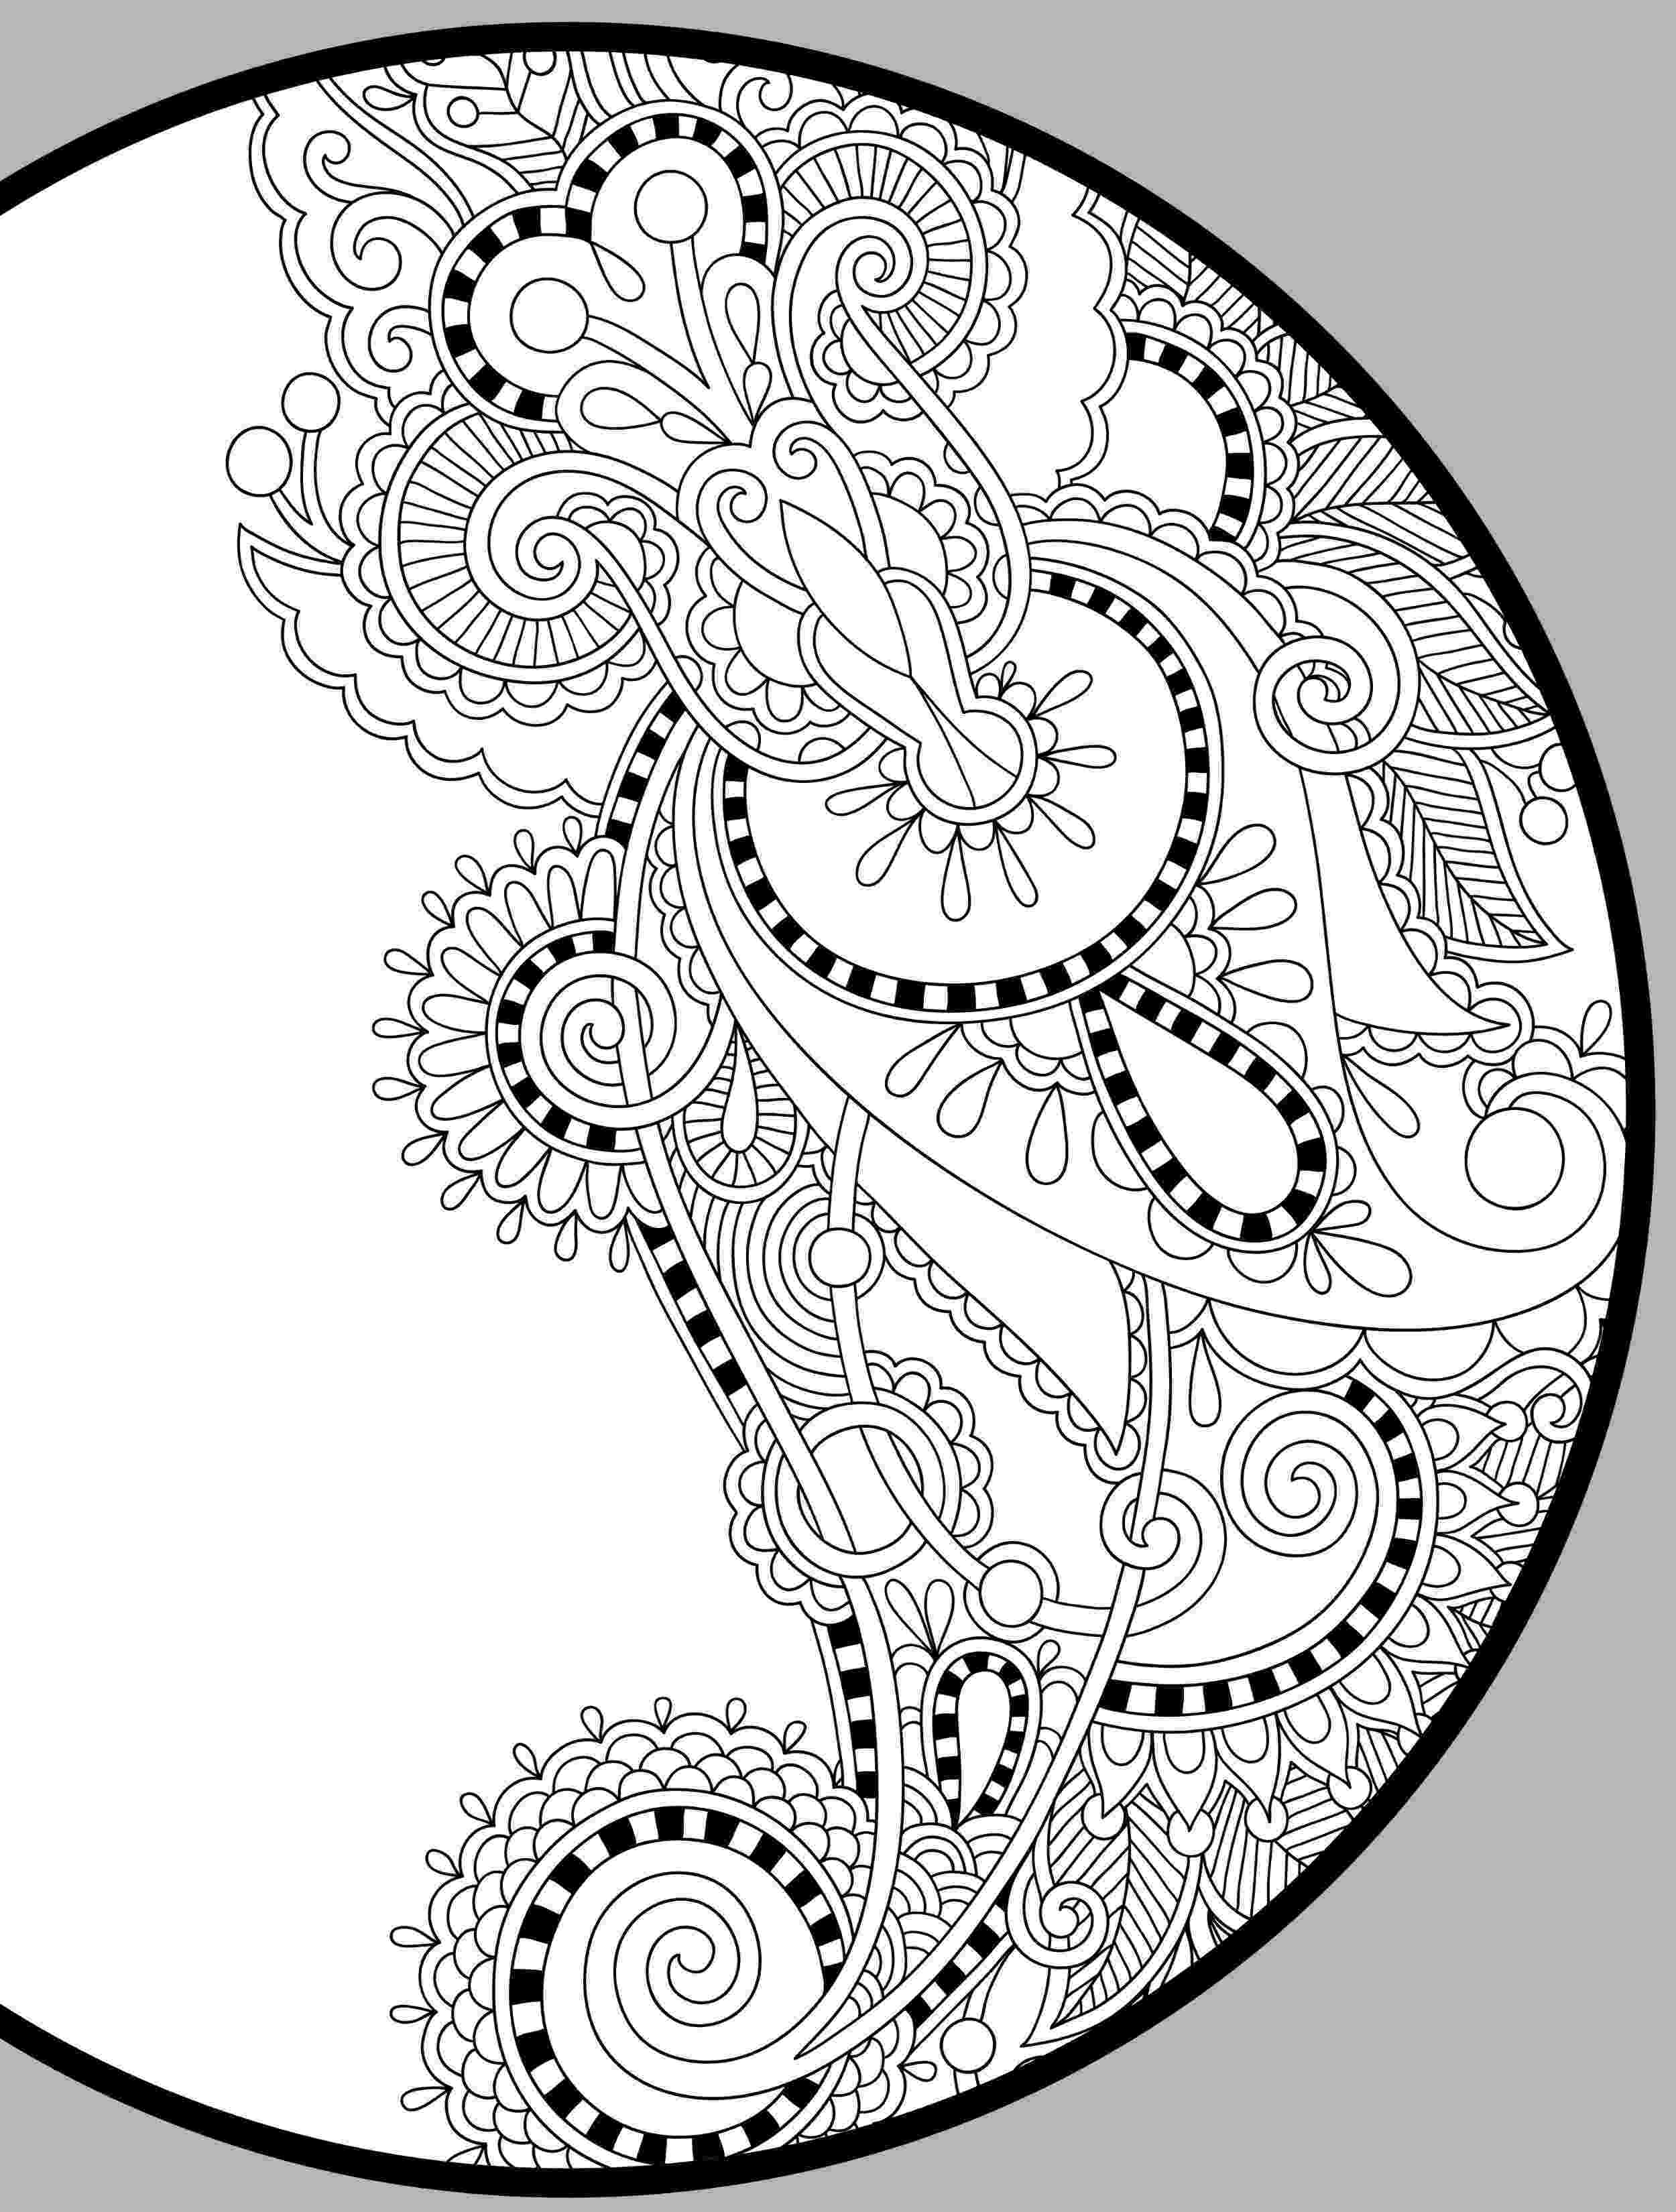 colouring pages adults online free items similar to pumpkin adult colouring page halloween adults free online colouring pages 